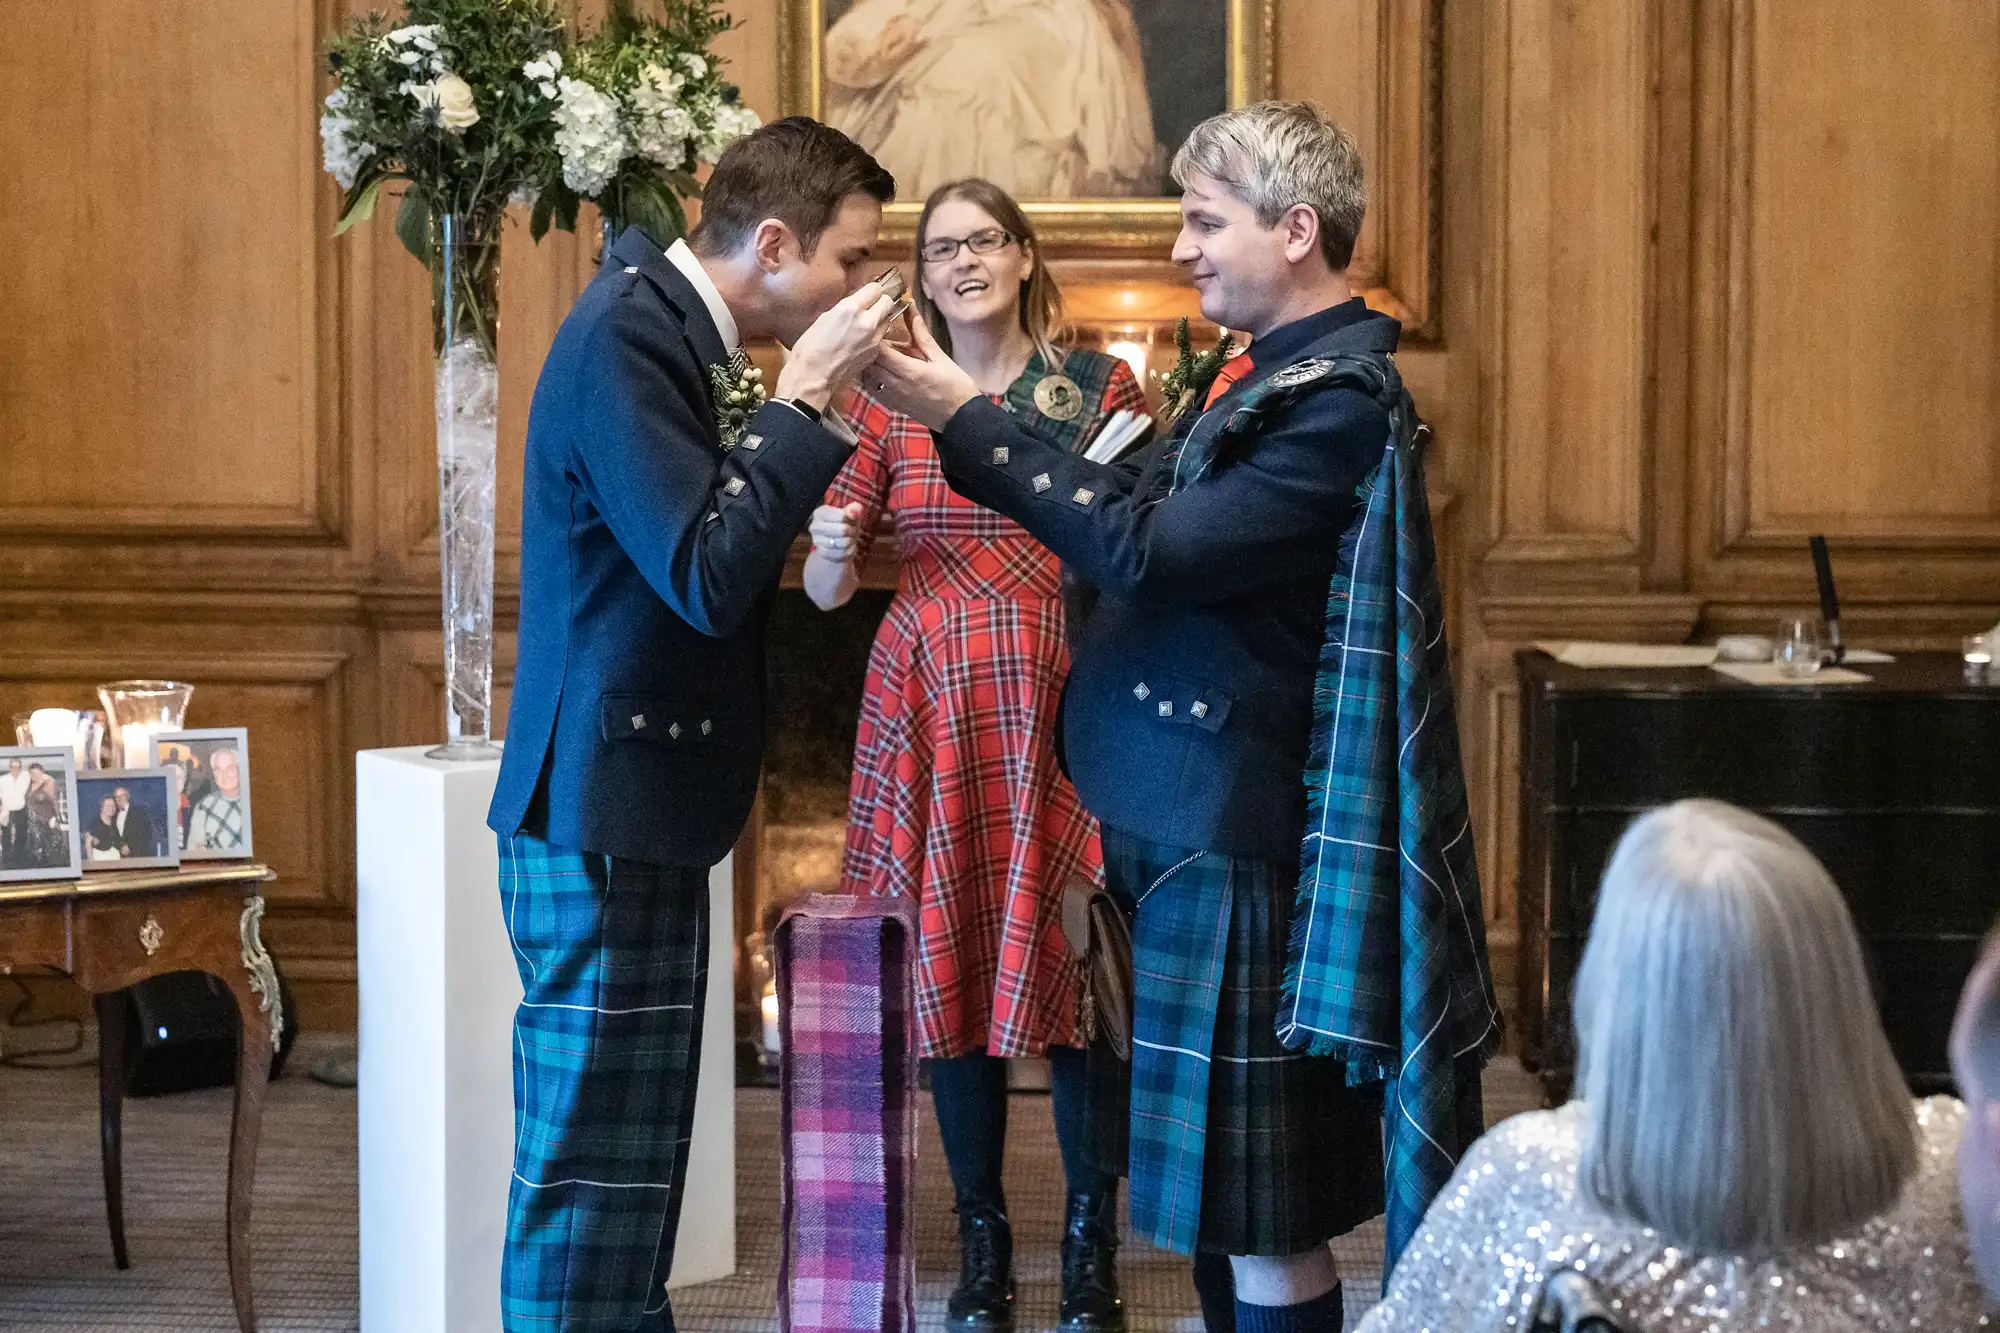 Two grooms in kilts exchange vows in front of a smiling officiant in a wood-paneled room. A woman in a gray sweater watches from the foreground.